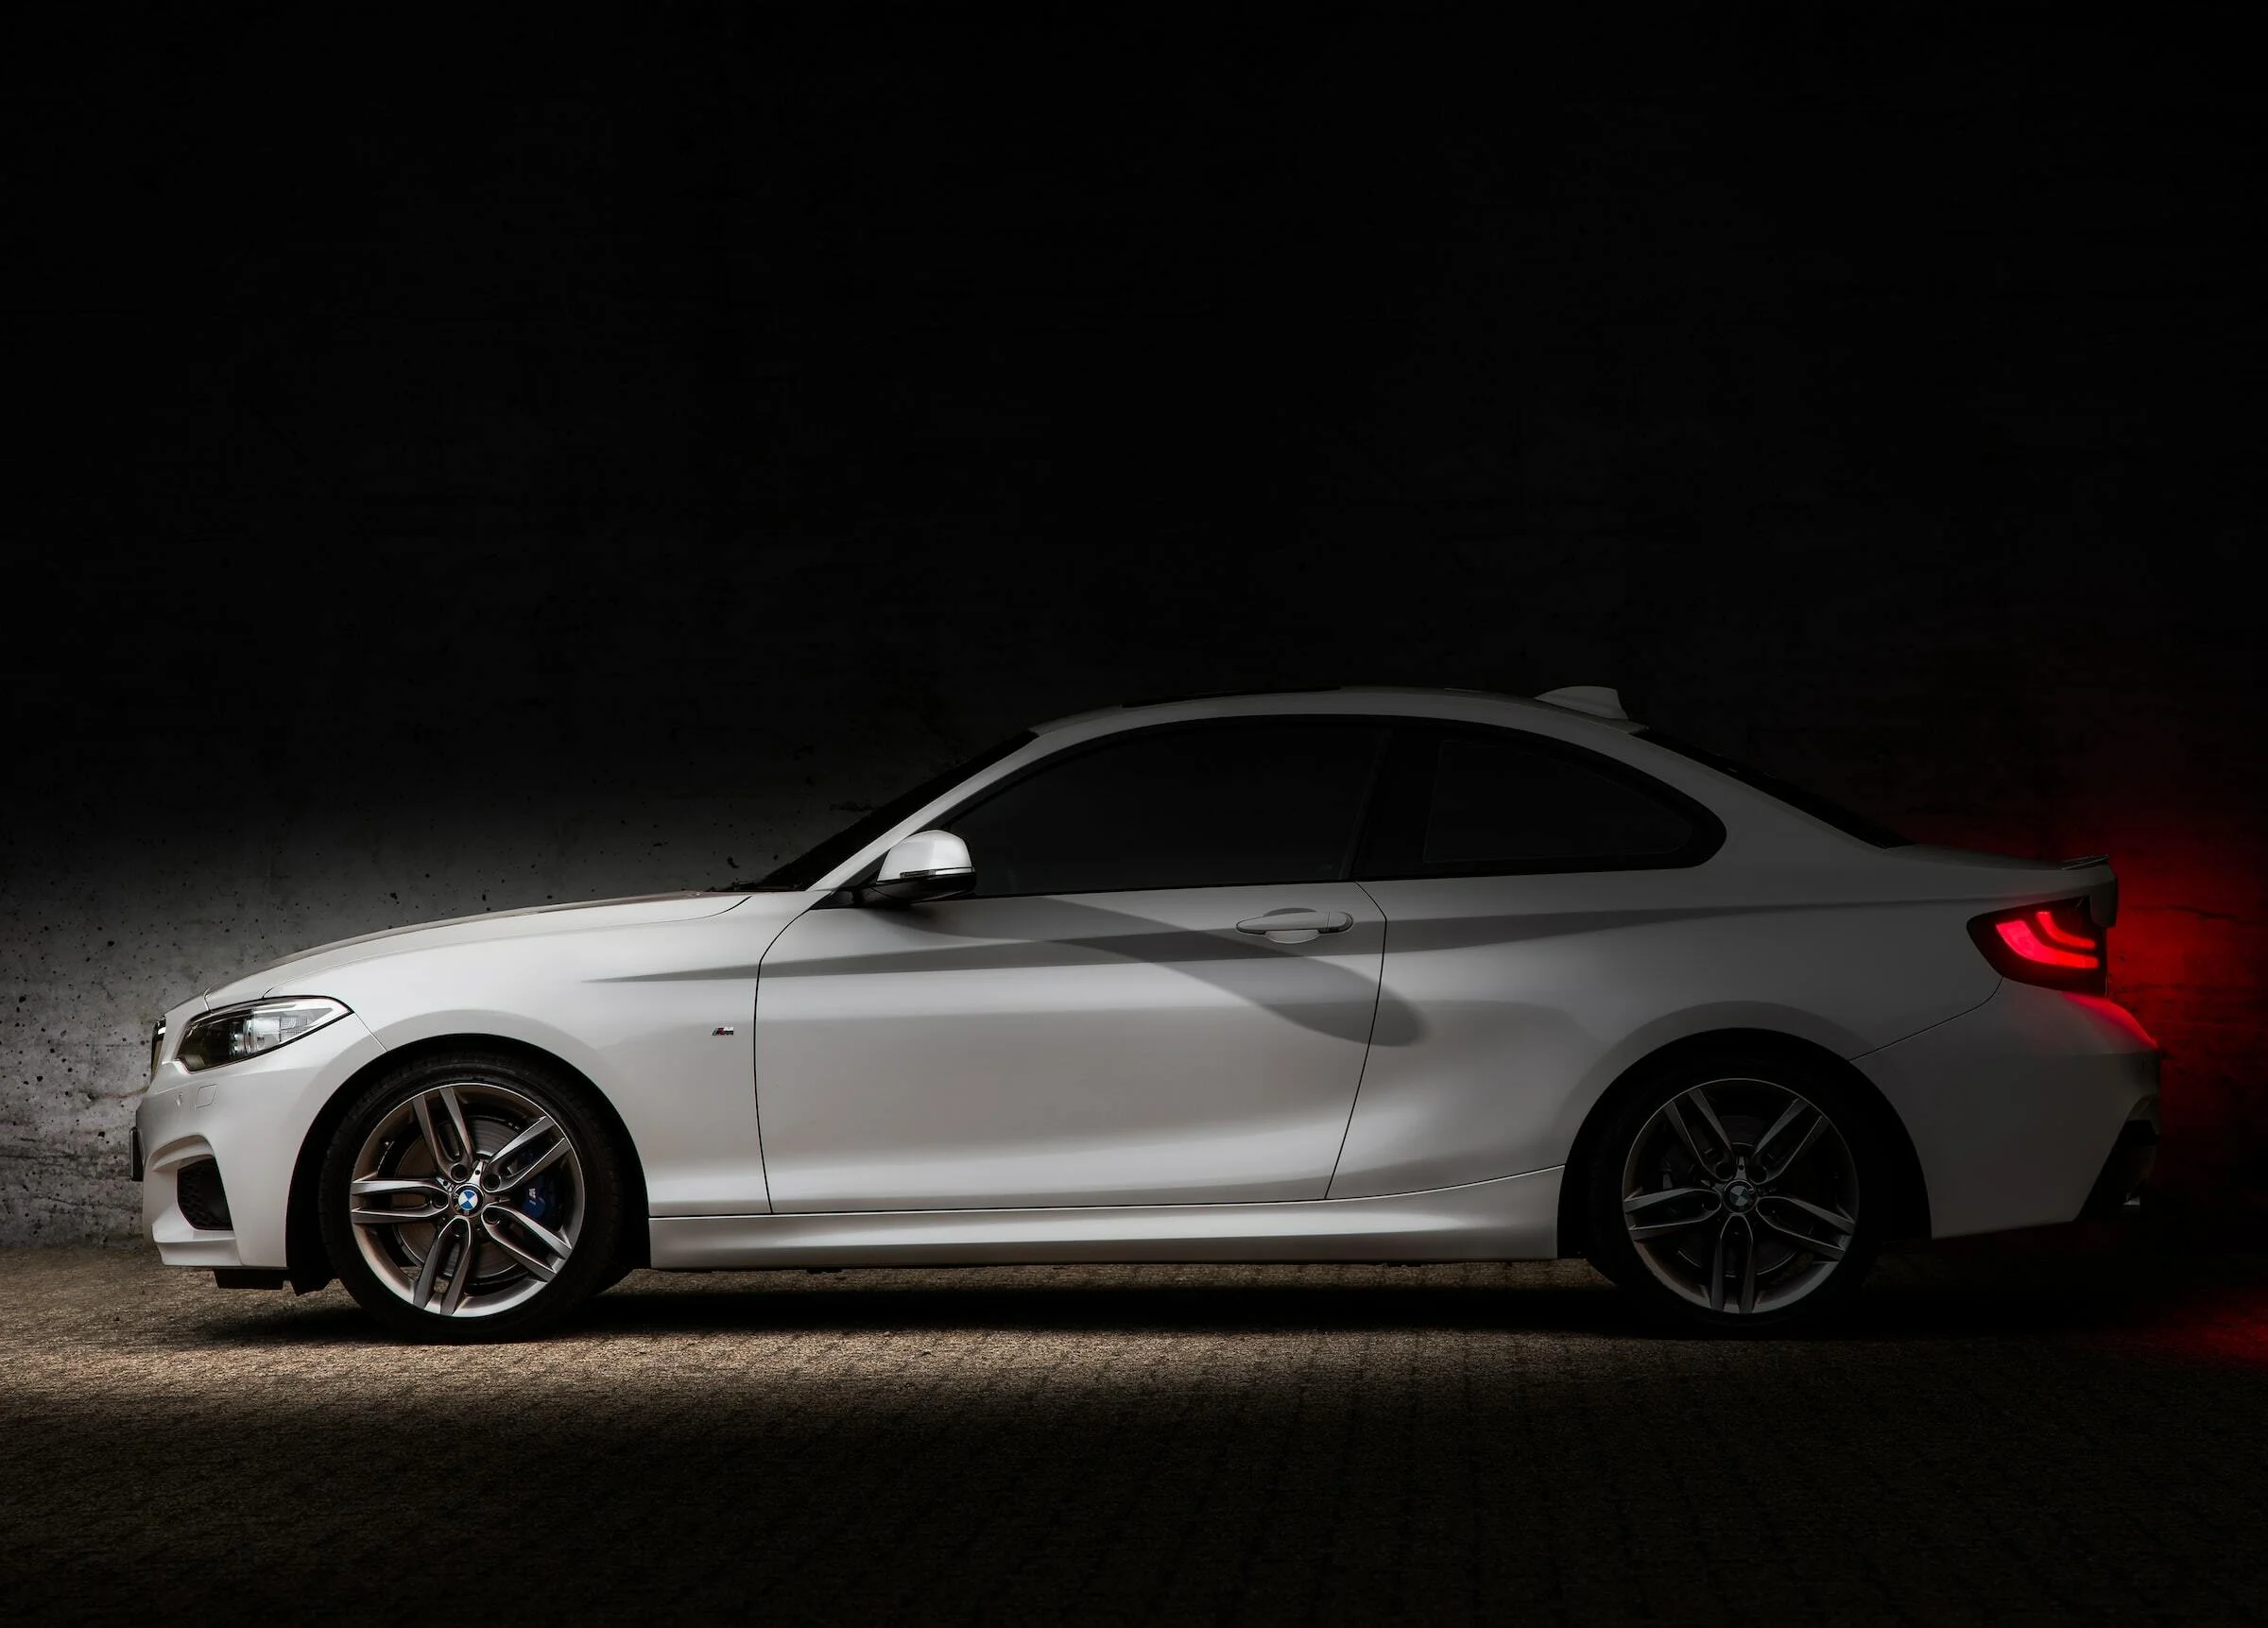 A white BMW parked up with a black background